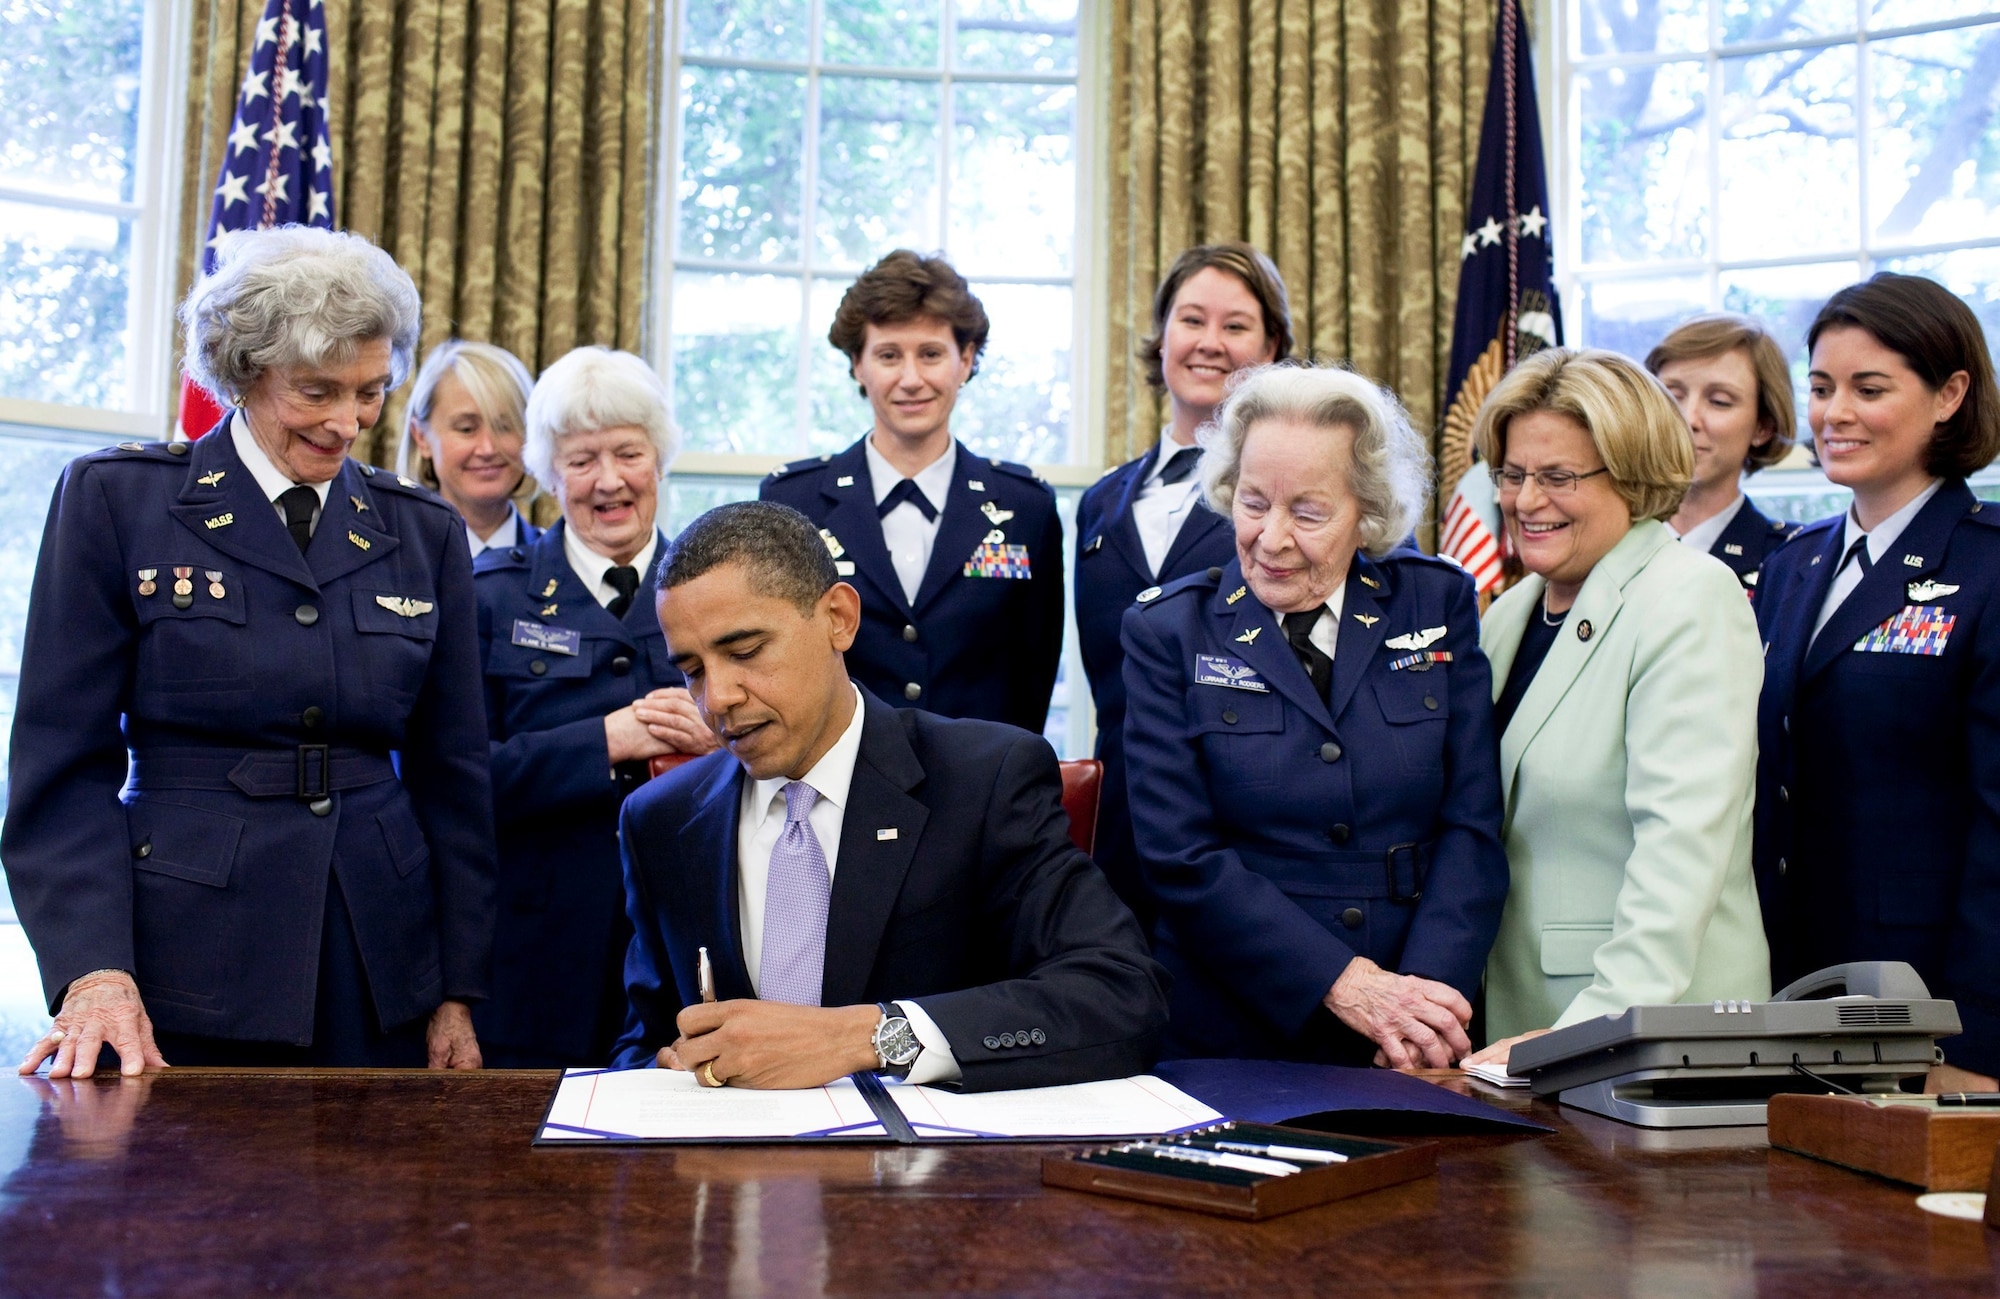 Pres. Barack Obama signs a bill at his desk at the White House with female advocates for the Women Airforce Service Pilot corps looking on.